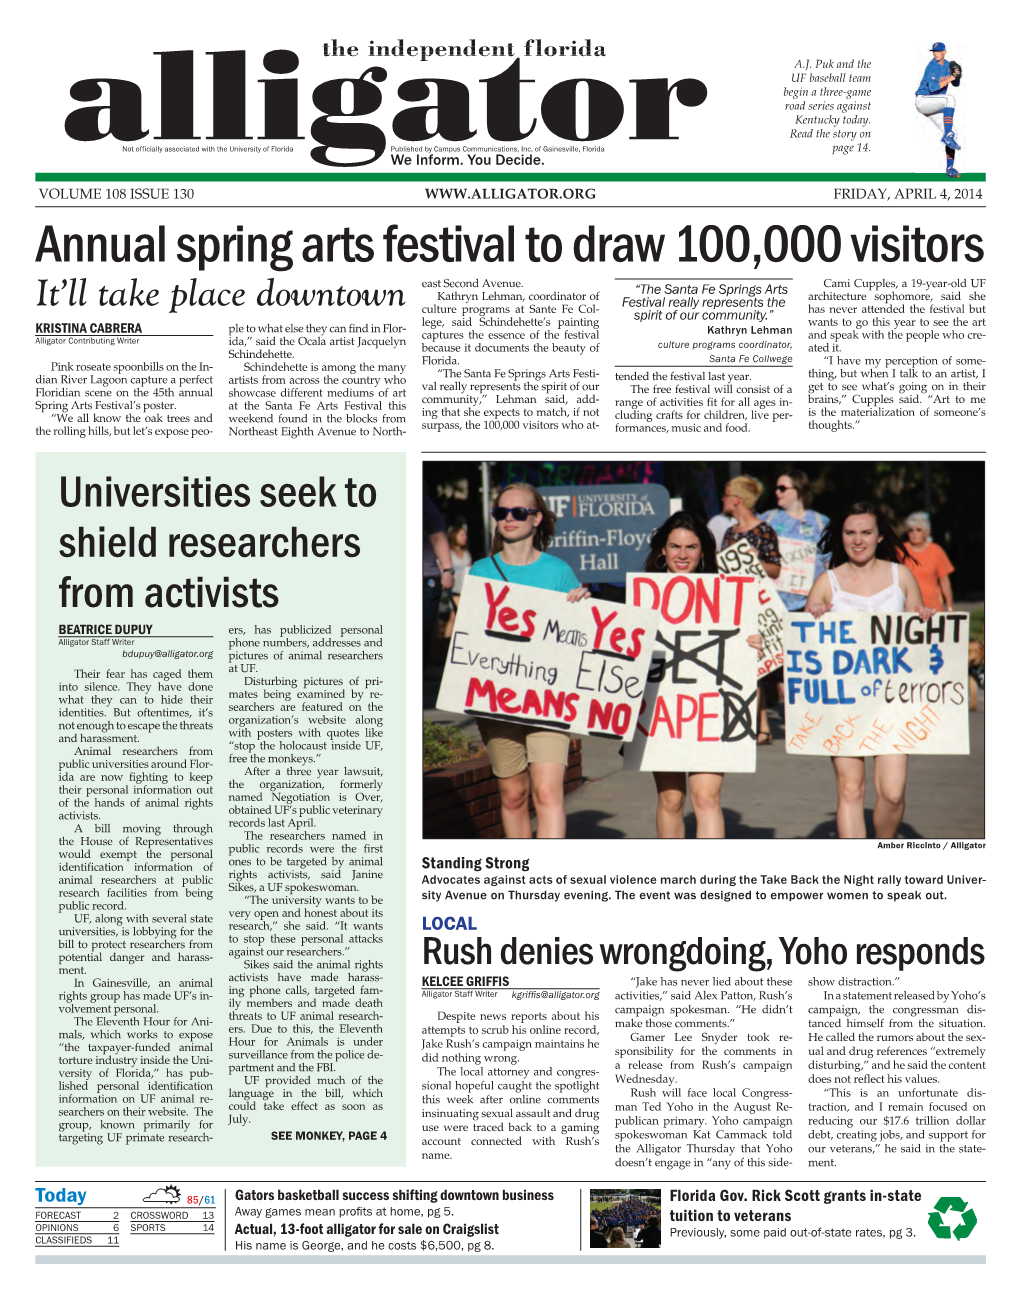 Annual Spring Arts Festival to Draw 100,000 Visitors East Second Avenue